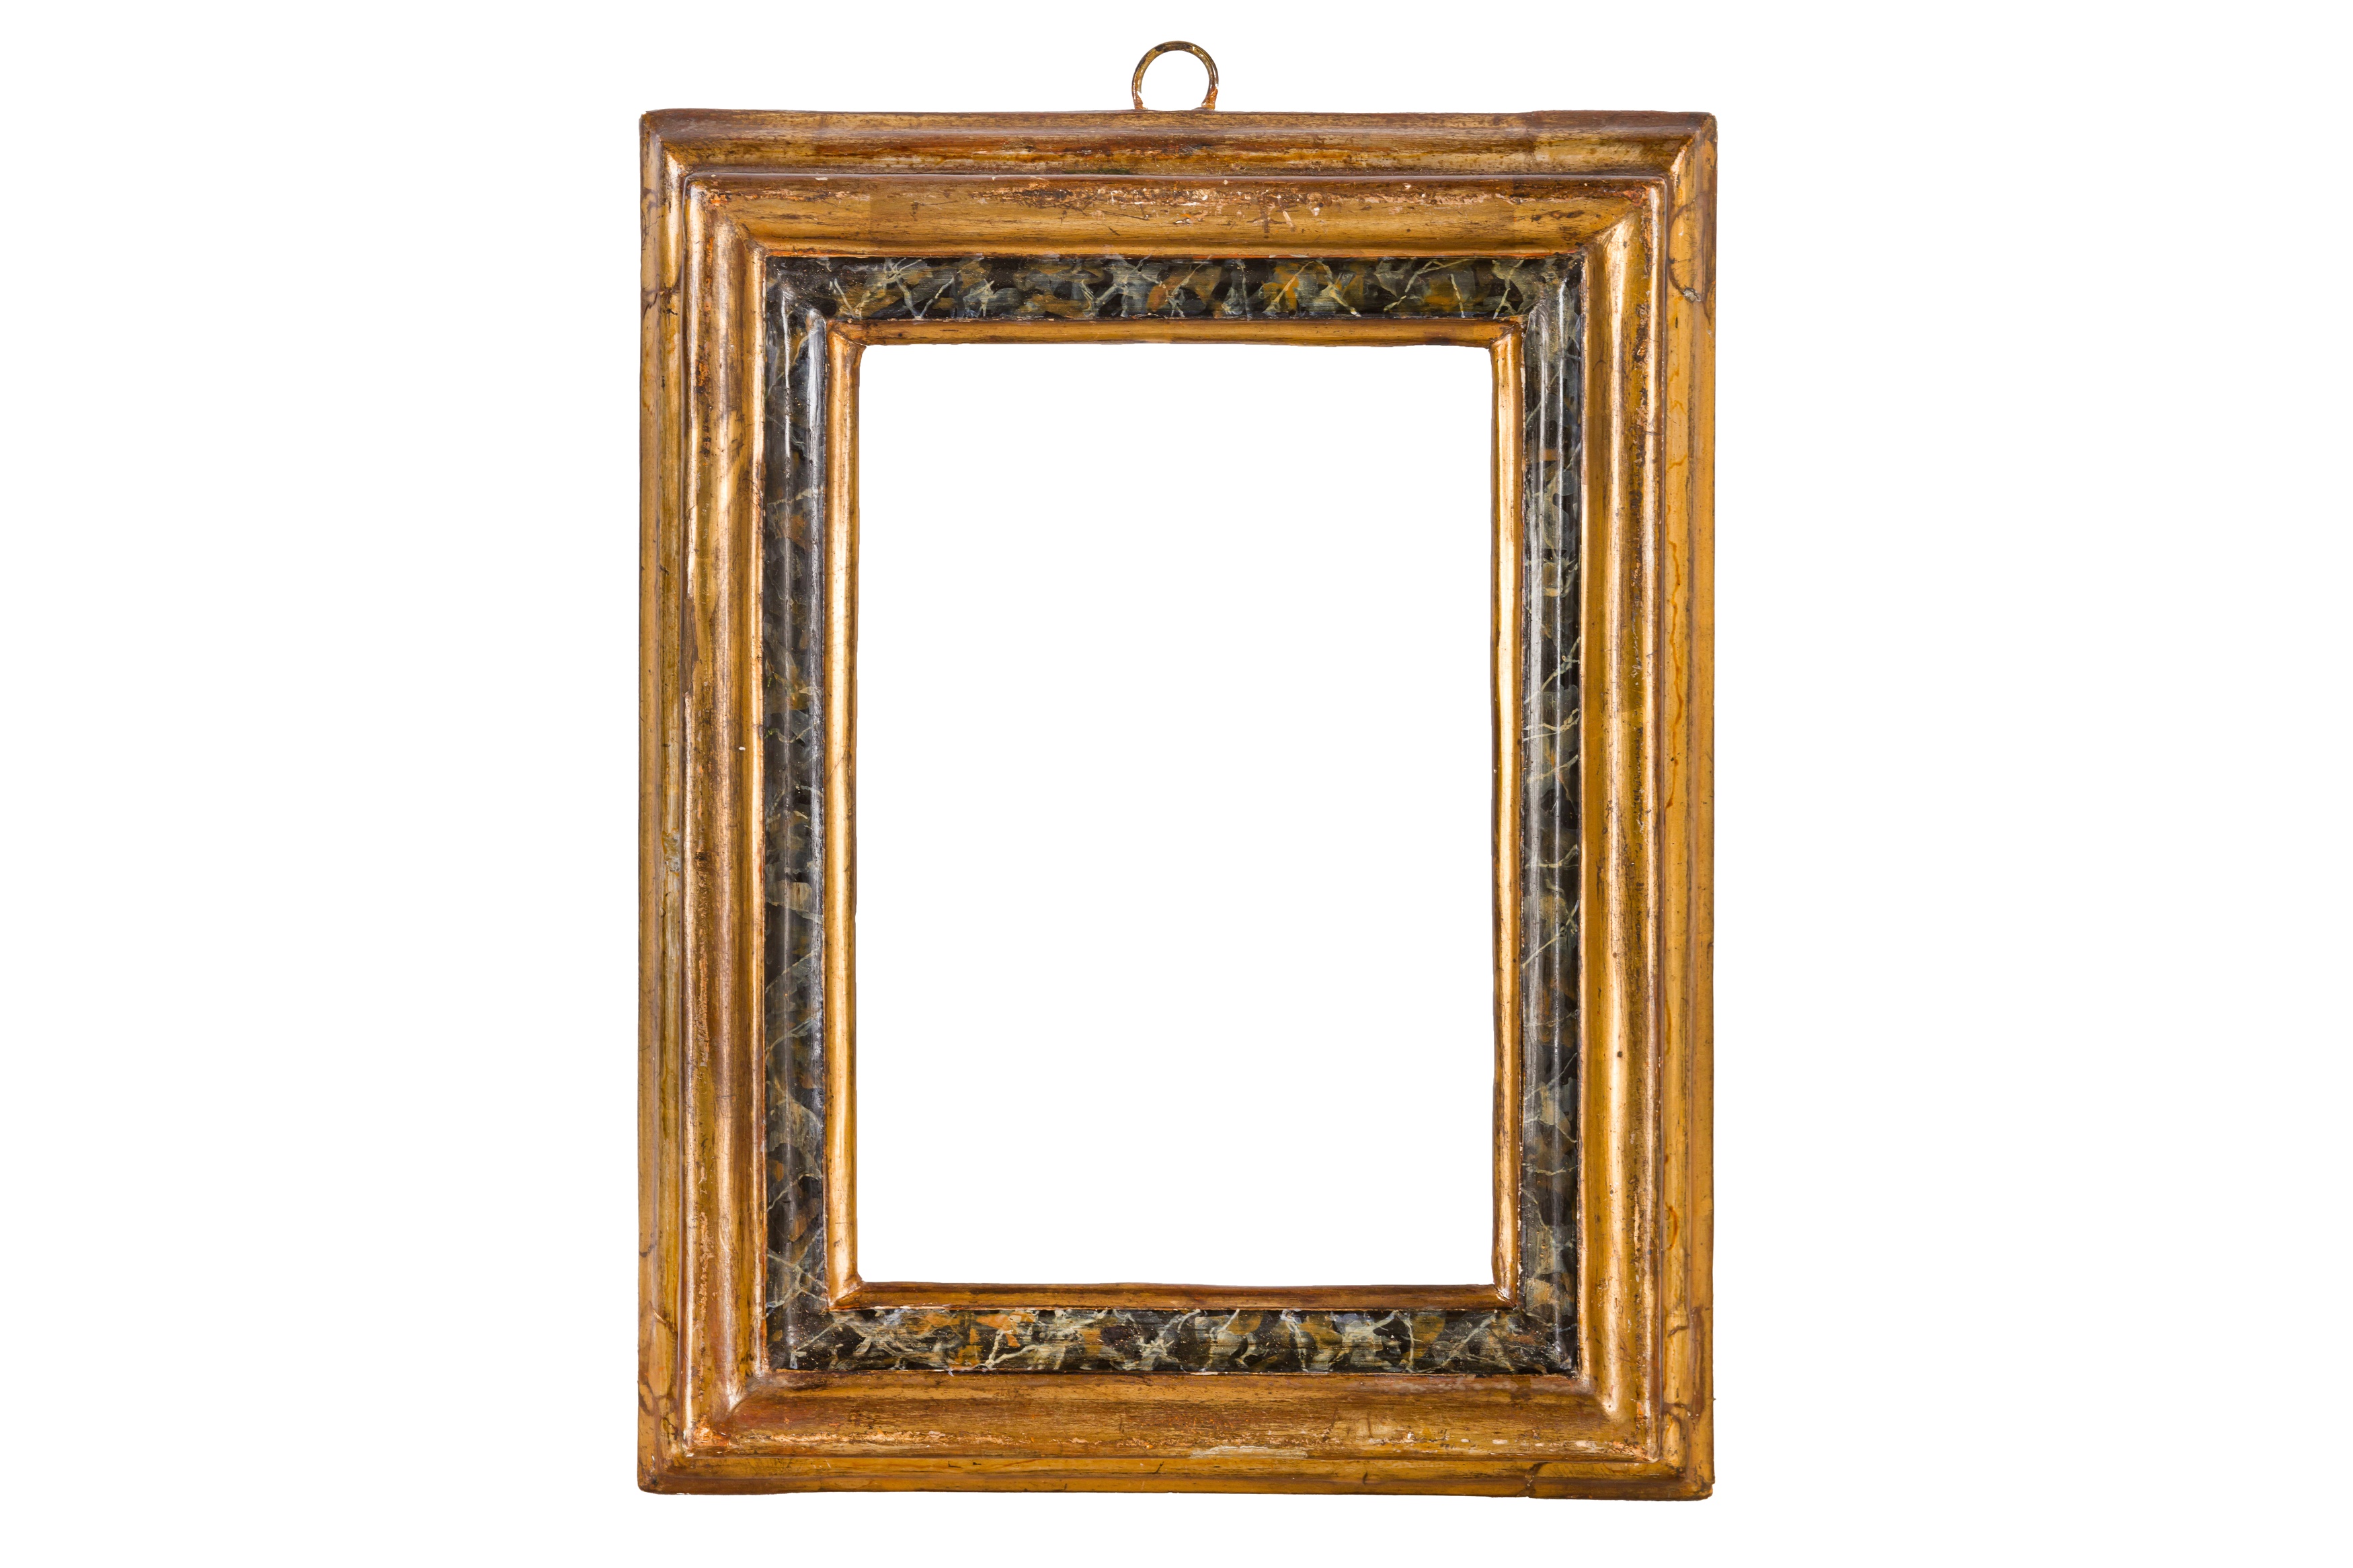 AN ITLALIAN 17TH CENTURY STYLE CARVED, GILDED AND PAINTED FRAME